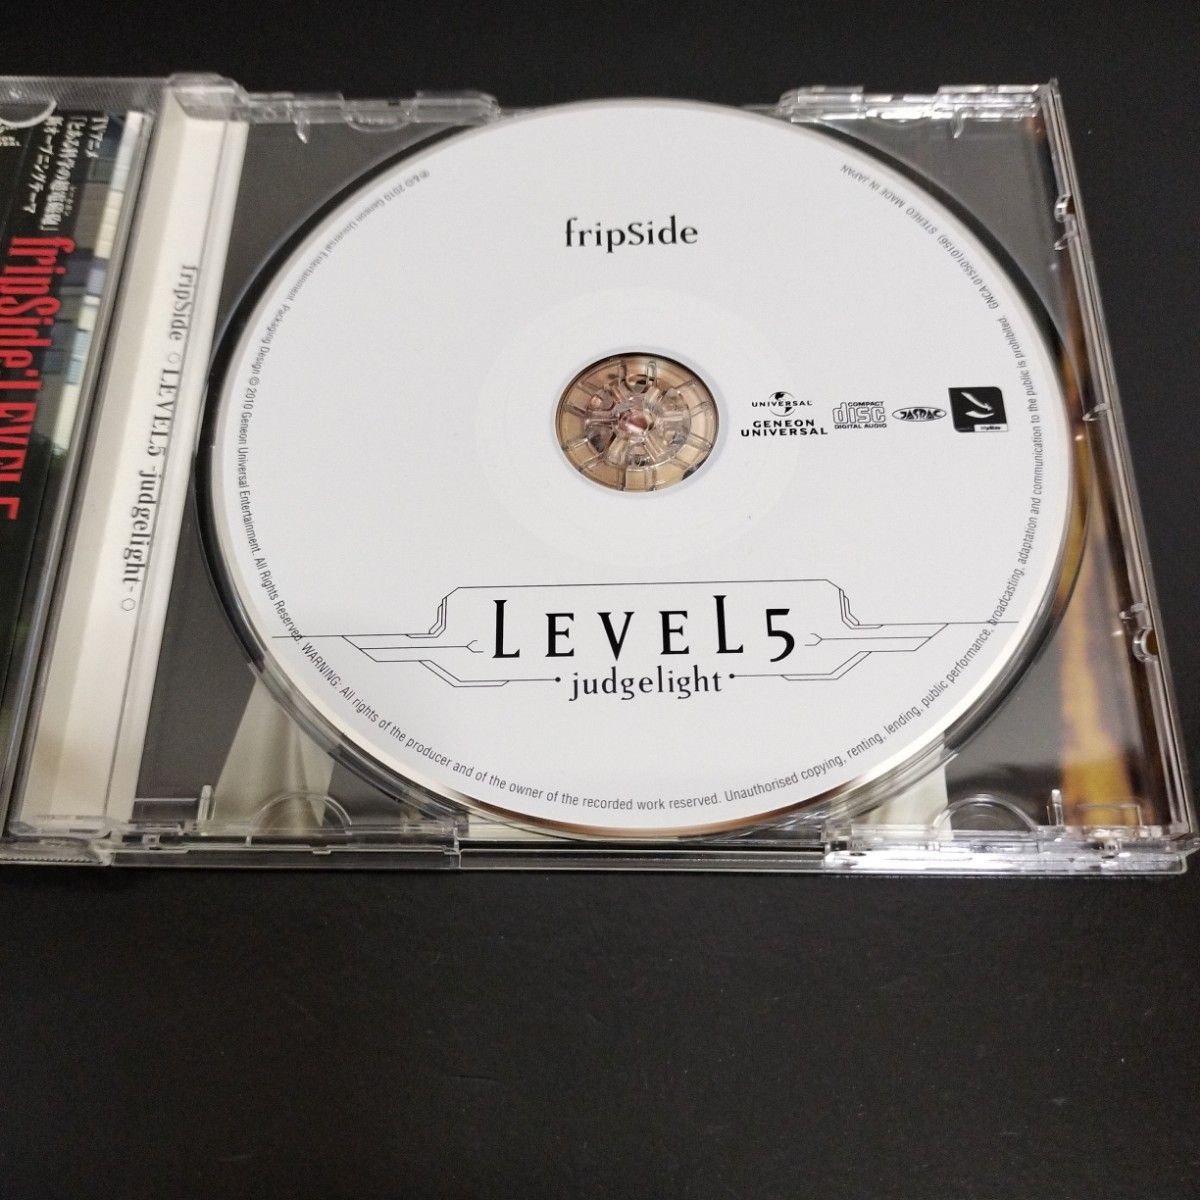 fripside　sister's noise　LEVEL5 2枚セット